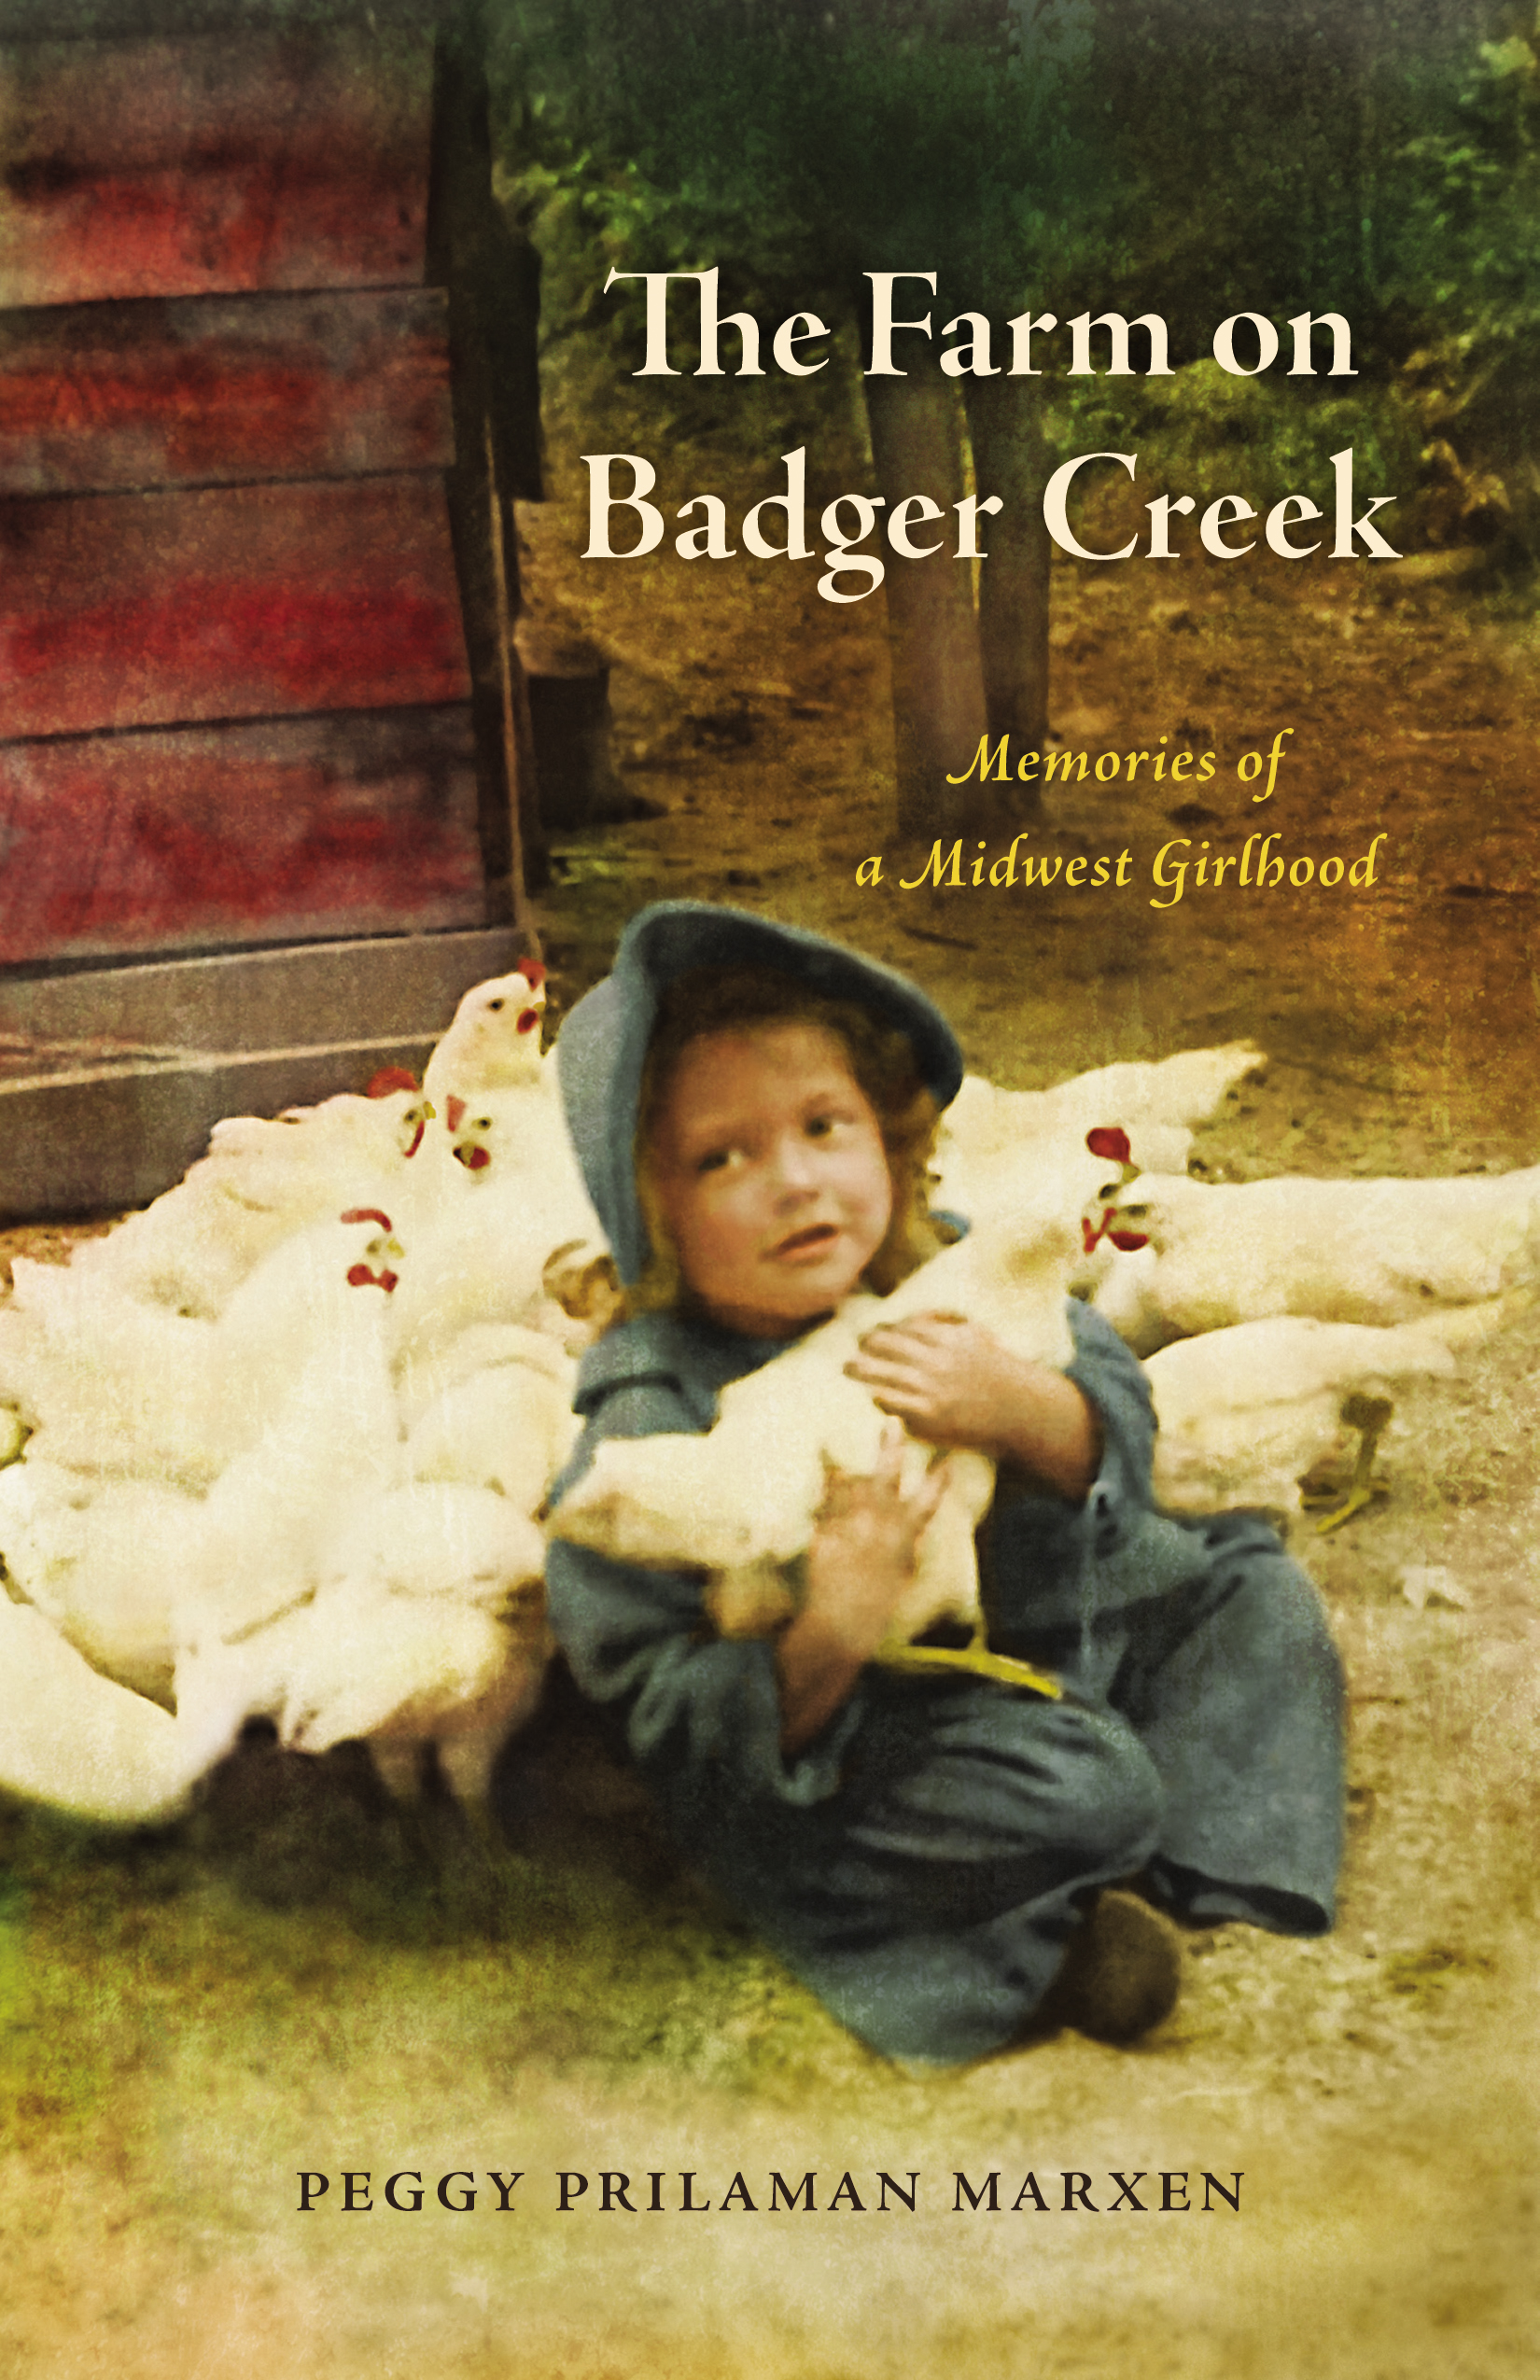 Book cover for, "The Farm on Badger Creek"